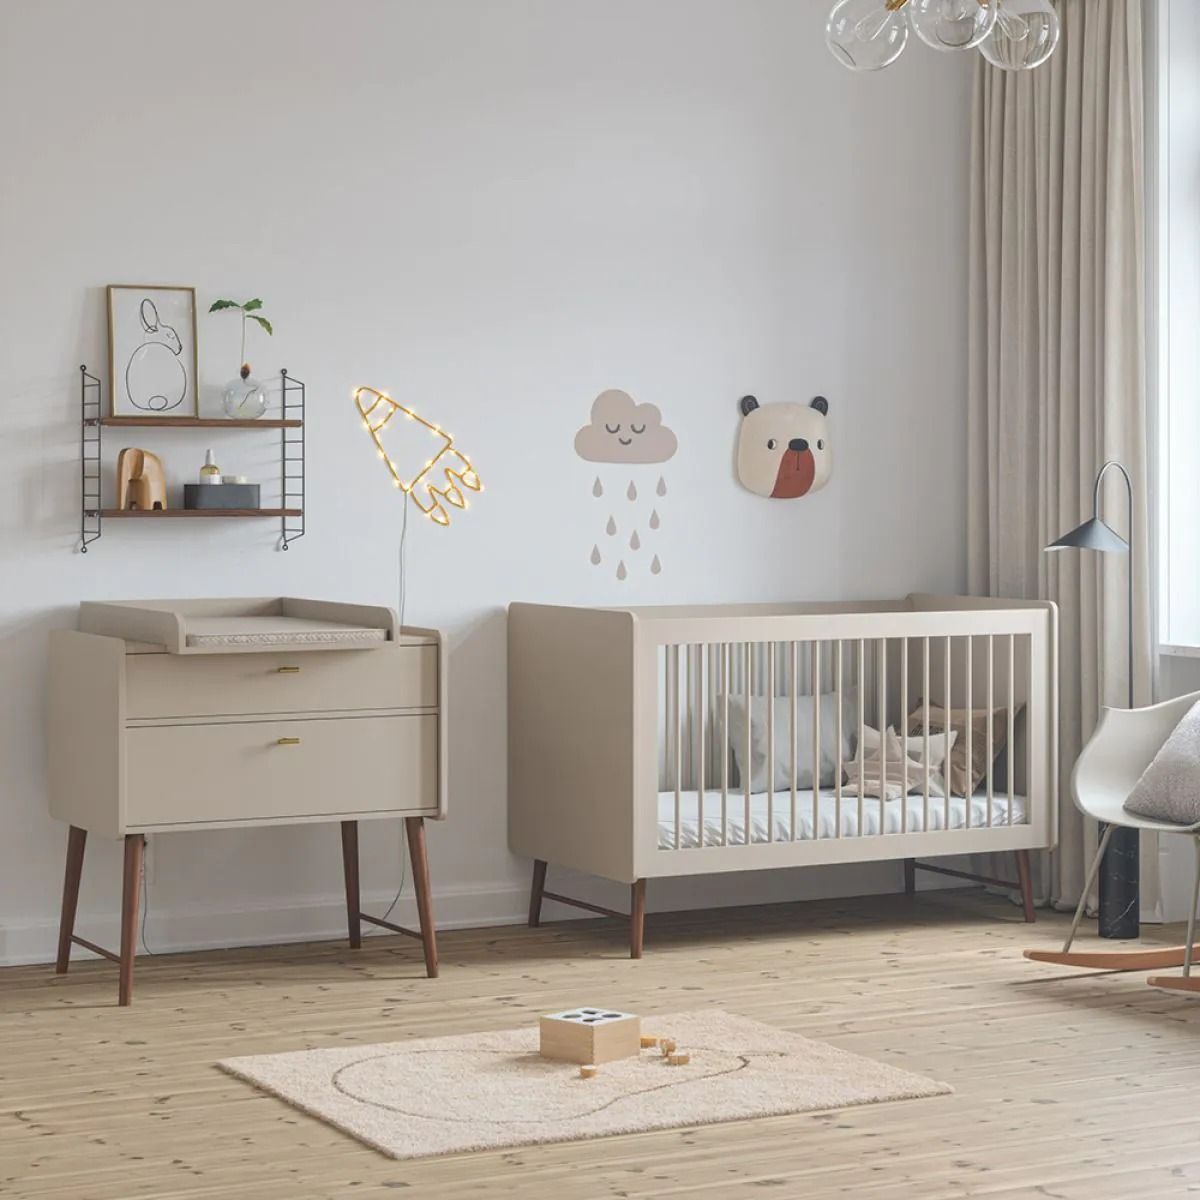 The Evolution of Contemporary Baby Furniture Collections